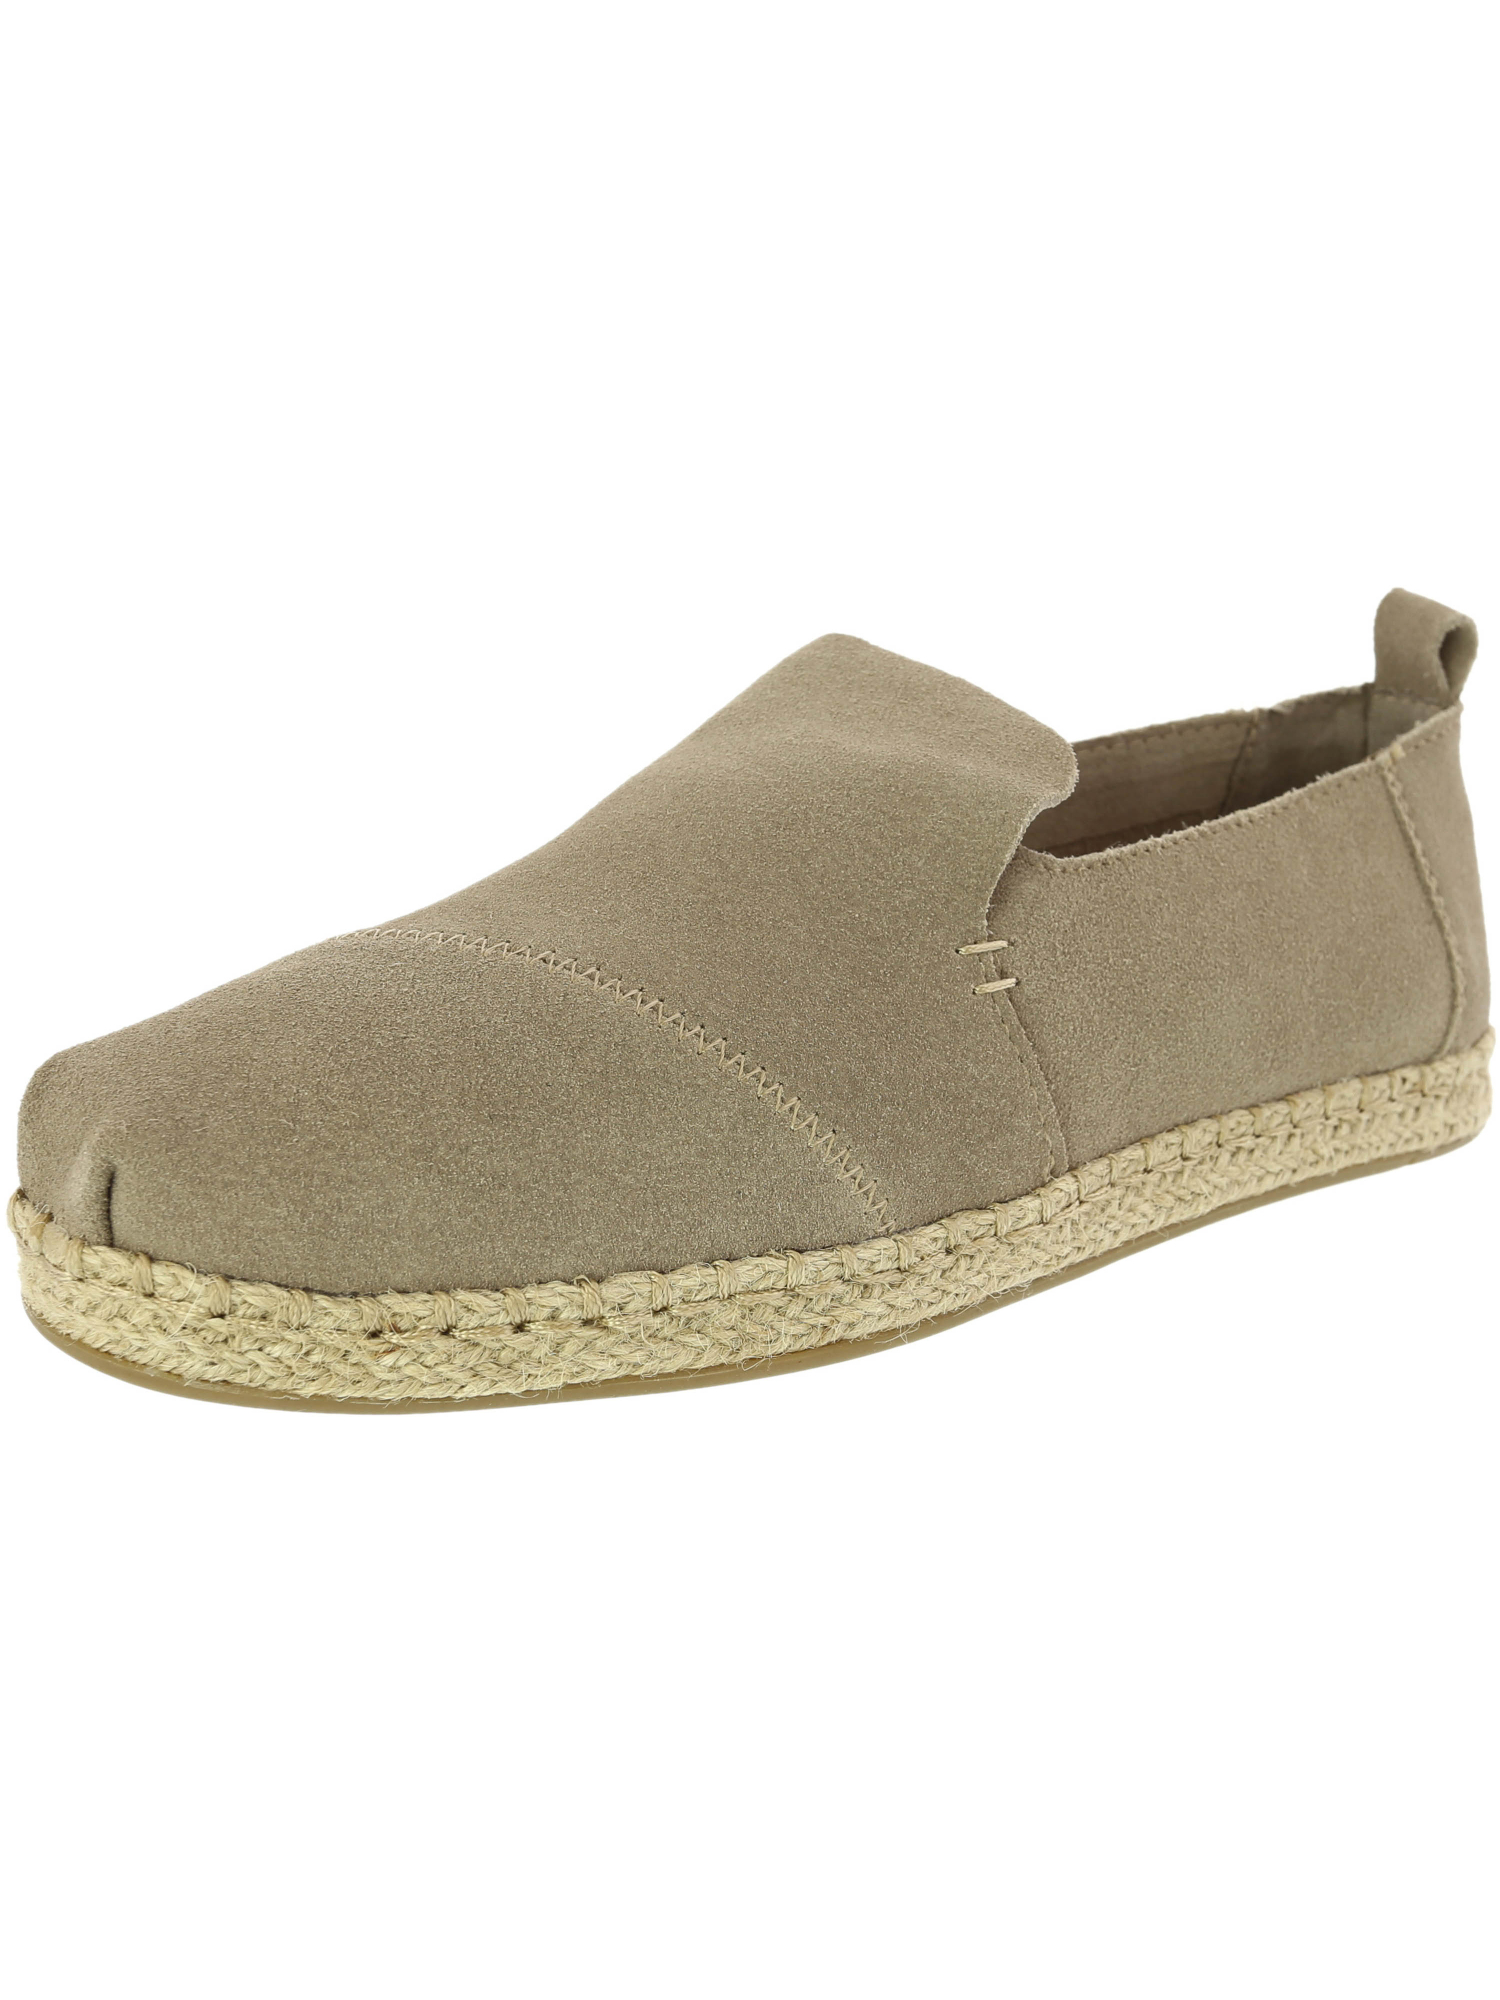 Toms Women's Deconstructed Alpargata Rope Suede Ankle-High Slip-On ...